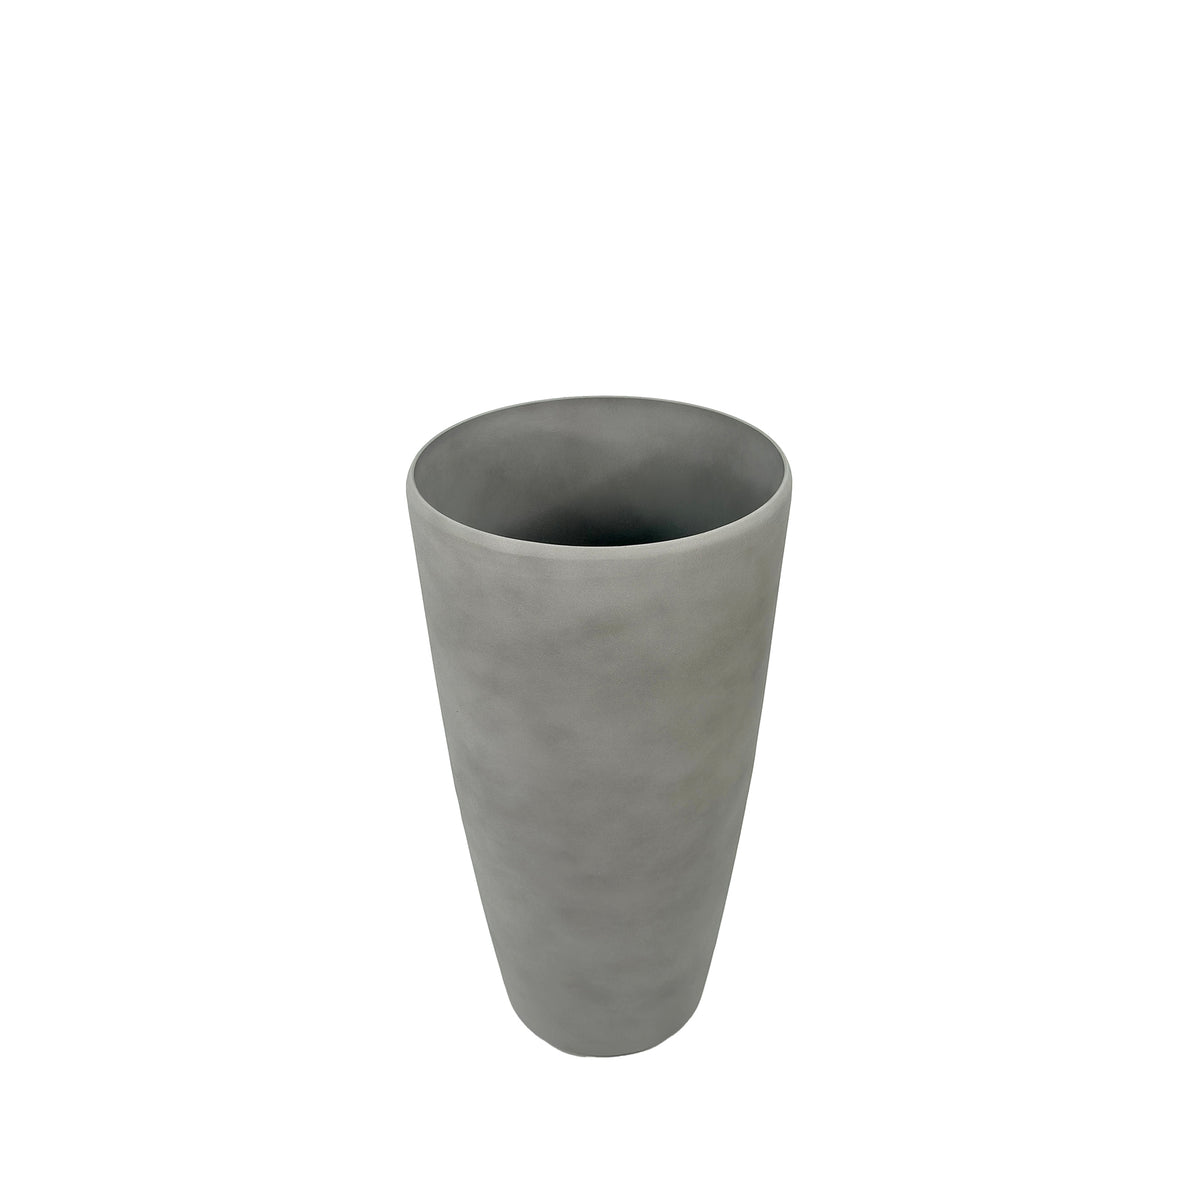 58cm Sage grey planter, Cement like finish, Medium, lightweight, Eco friendly and Weather proof, Front view